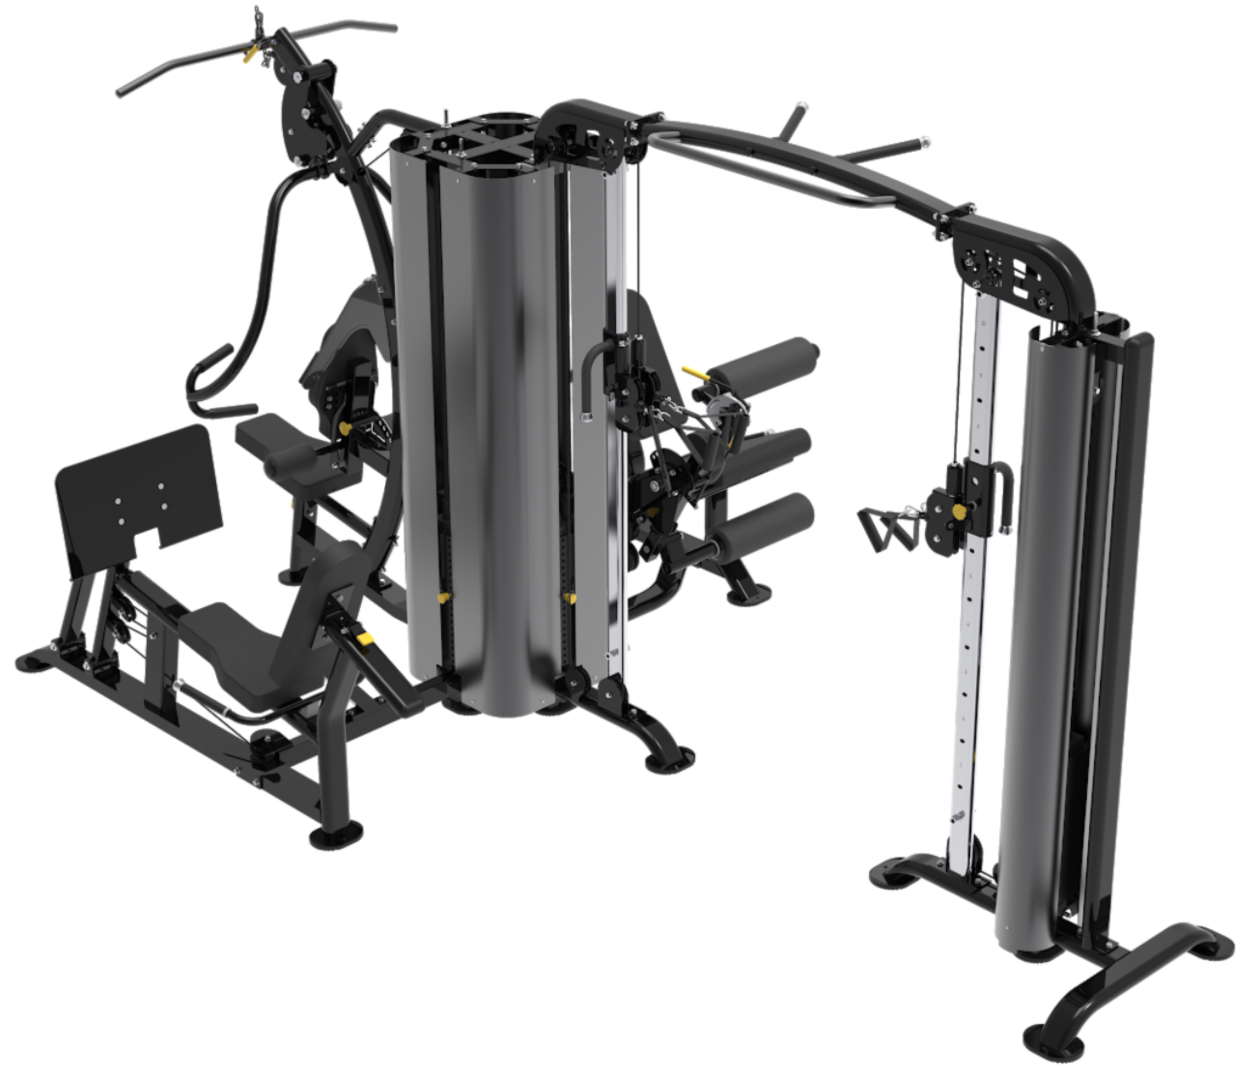 New XPT 5 Station Multi-Gym with Leg Press & Dual Cable Cross Functional Trainer